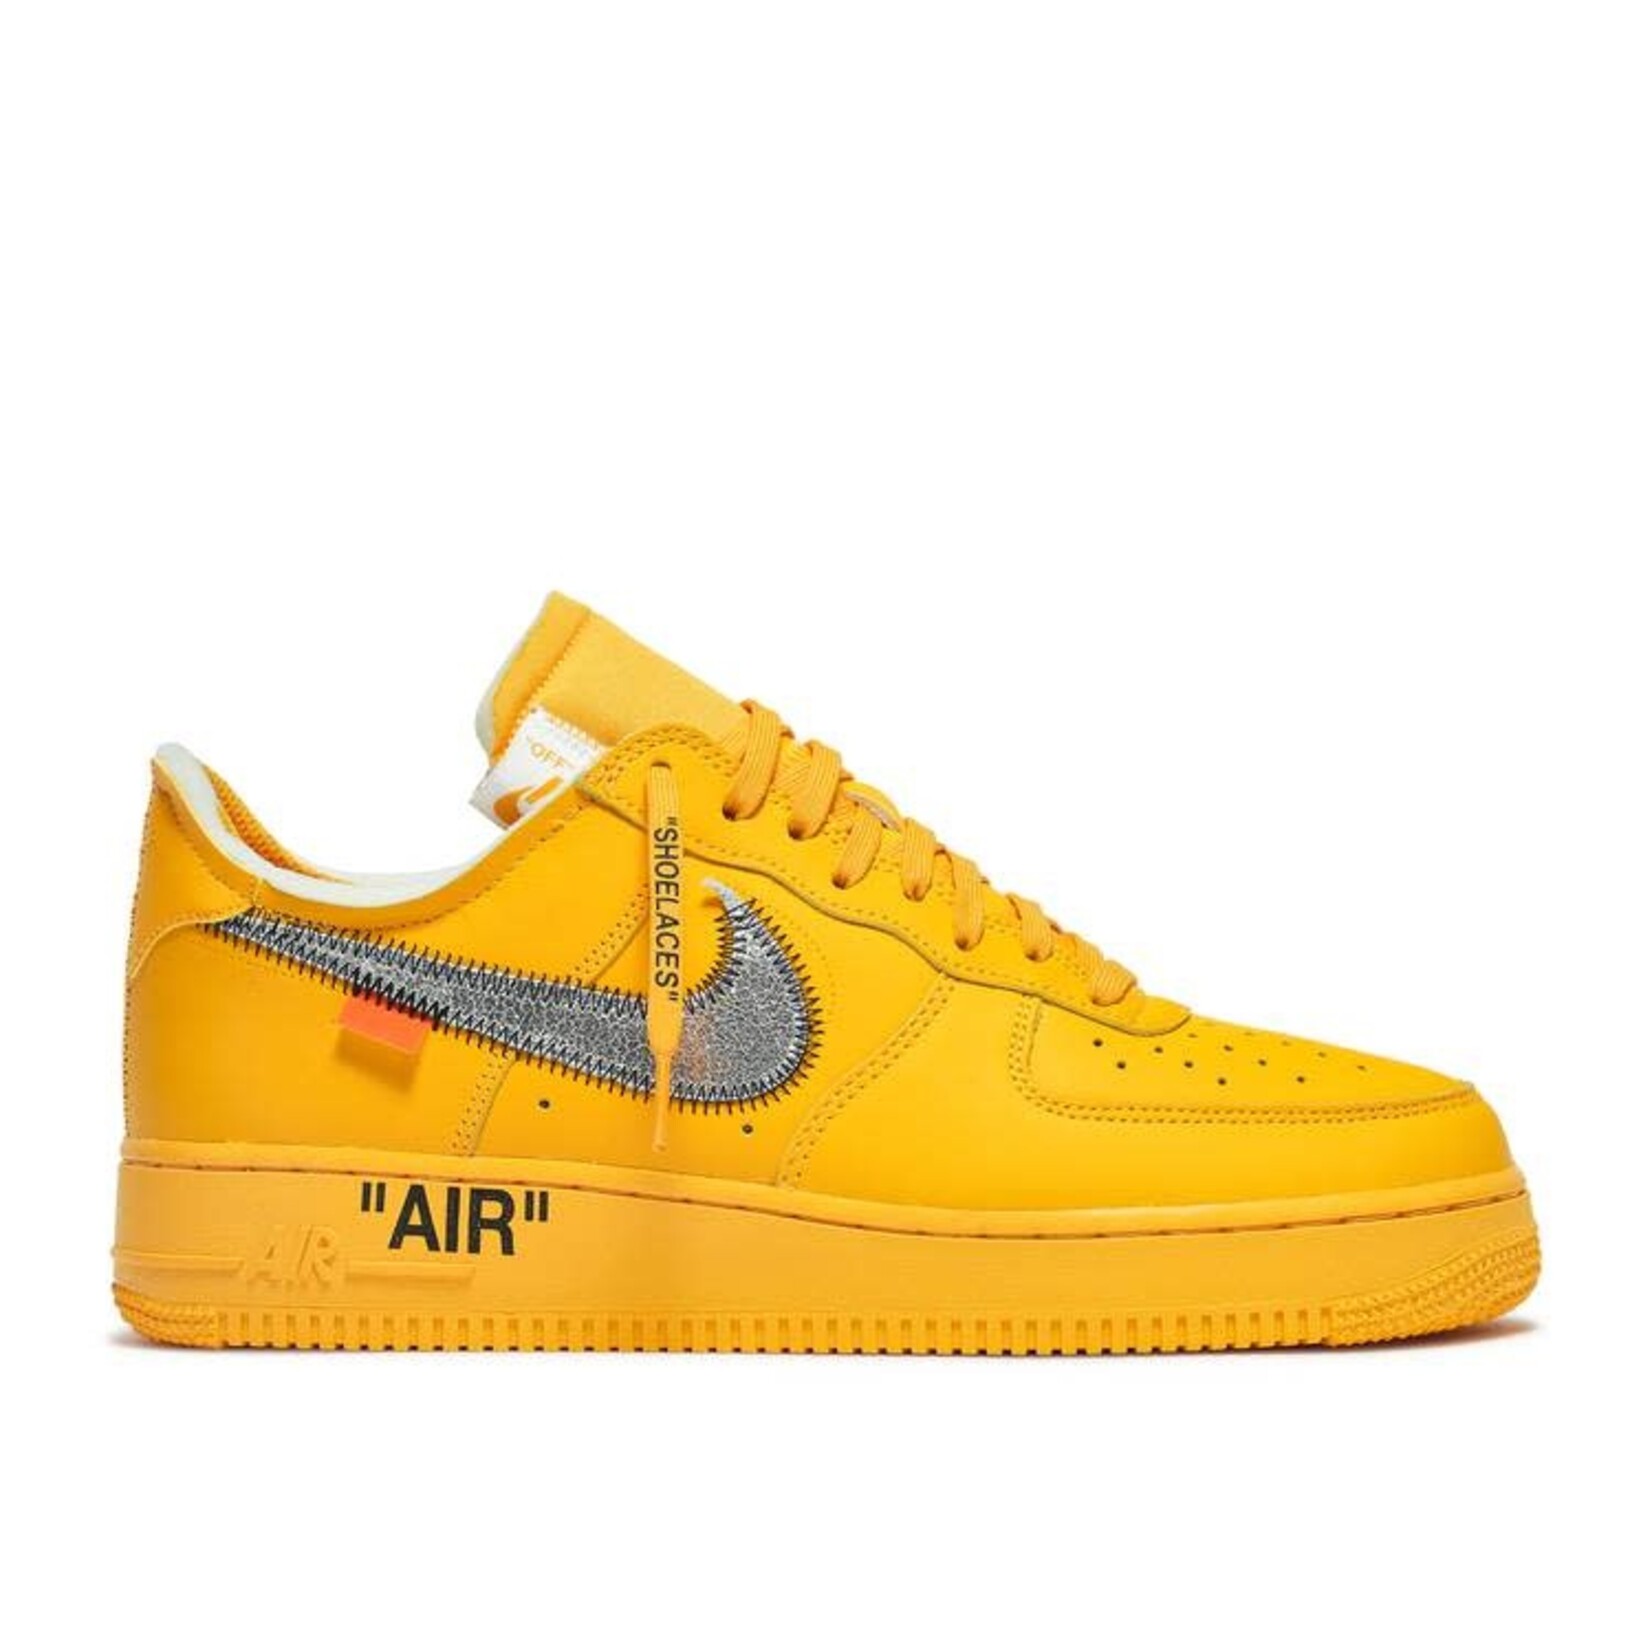 Nike Nike Air Force 1 Low Off-White ICA University Gold Size 10, DS BRAND NEW